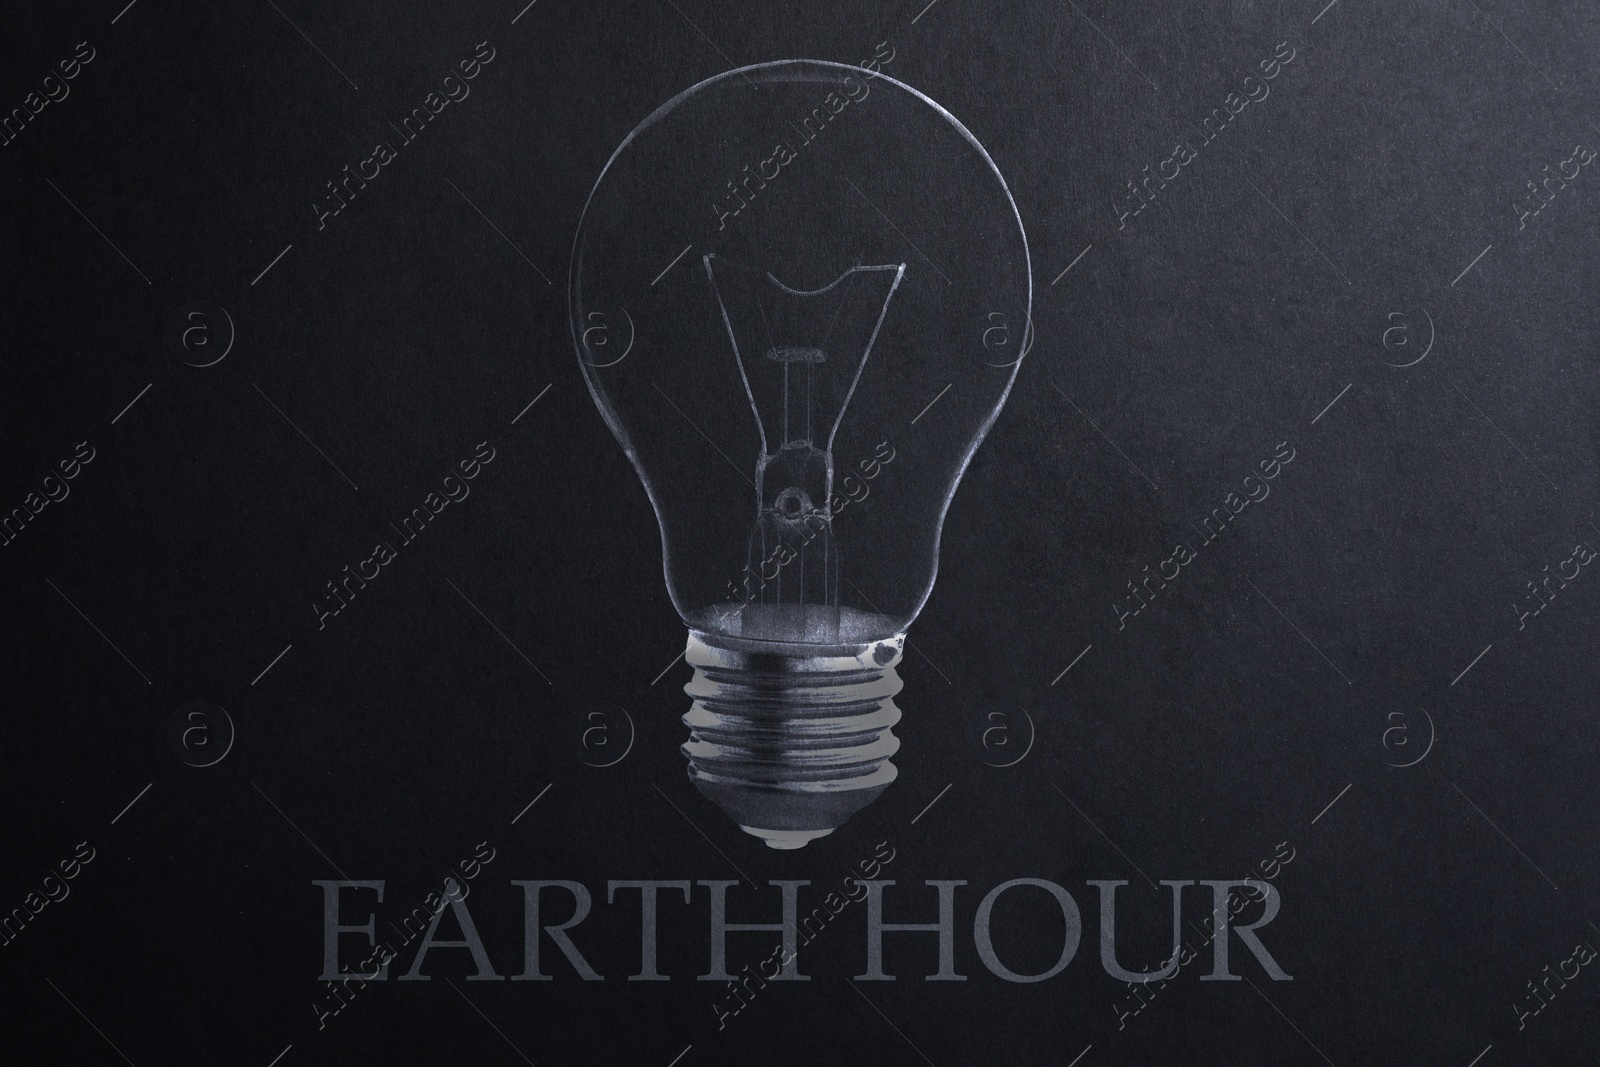 Image of Earth hour concept. Drawing of light bulb on black paper